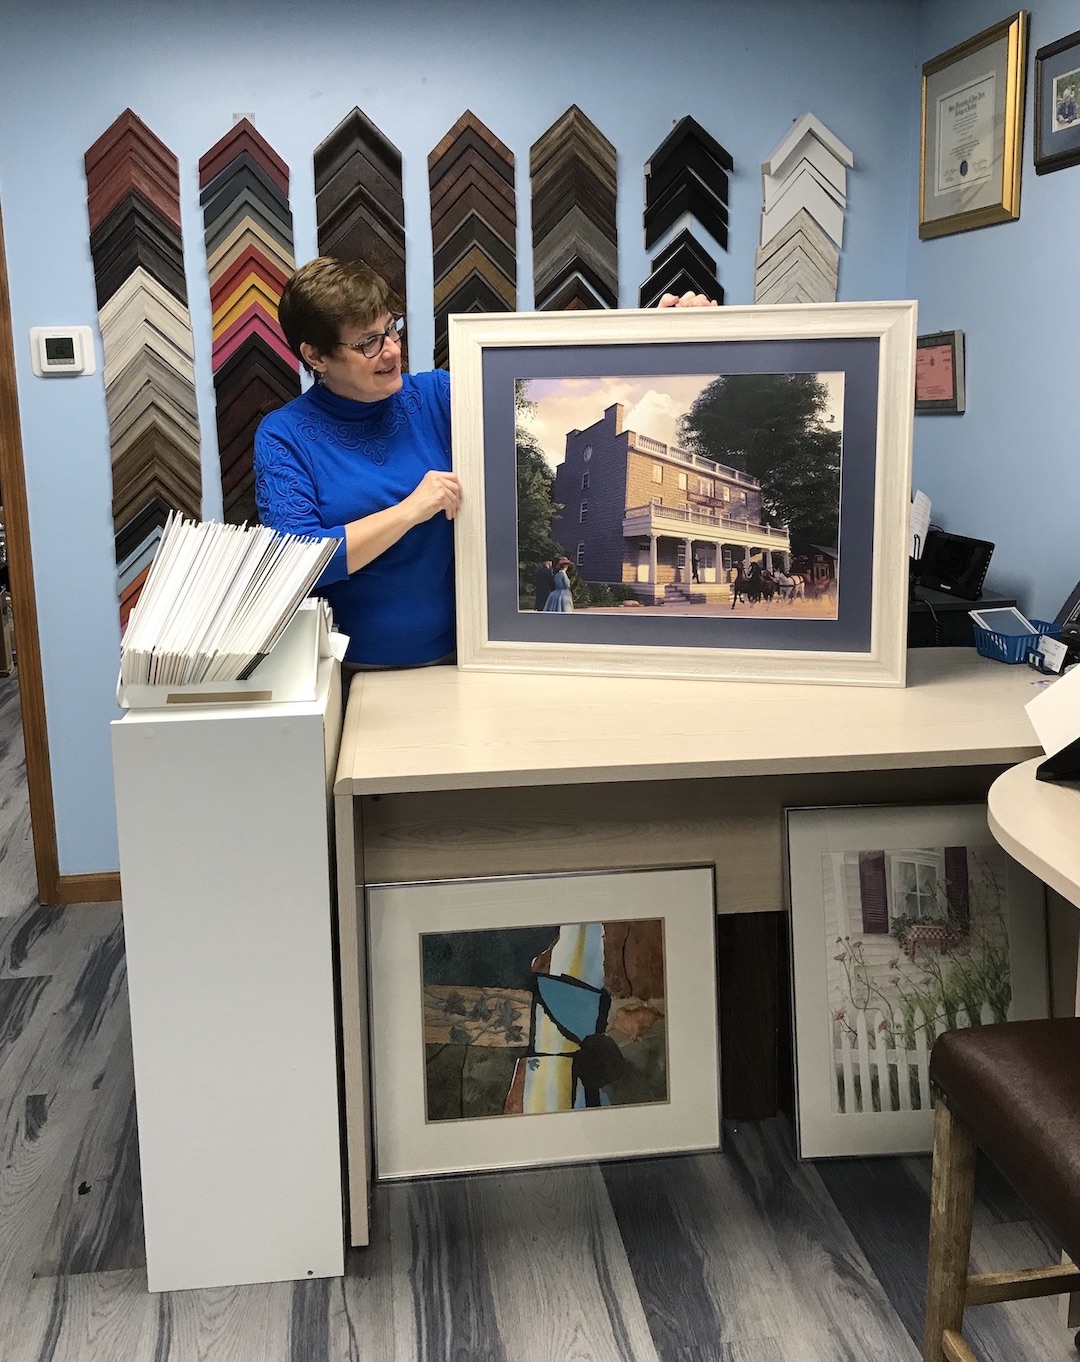 Susan Sullivan at Sue's Frame of Mind, located at 900 Center St. - just below Lewiston Vision Center. (Submitted photo)